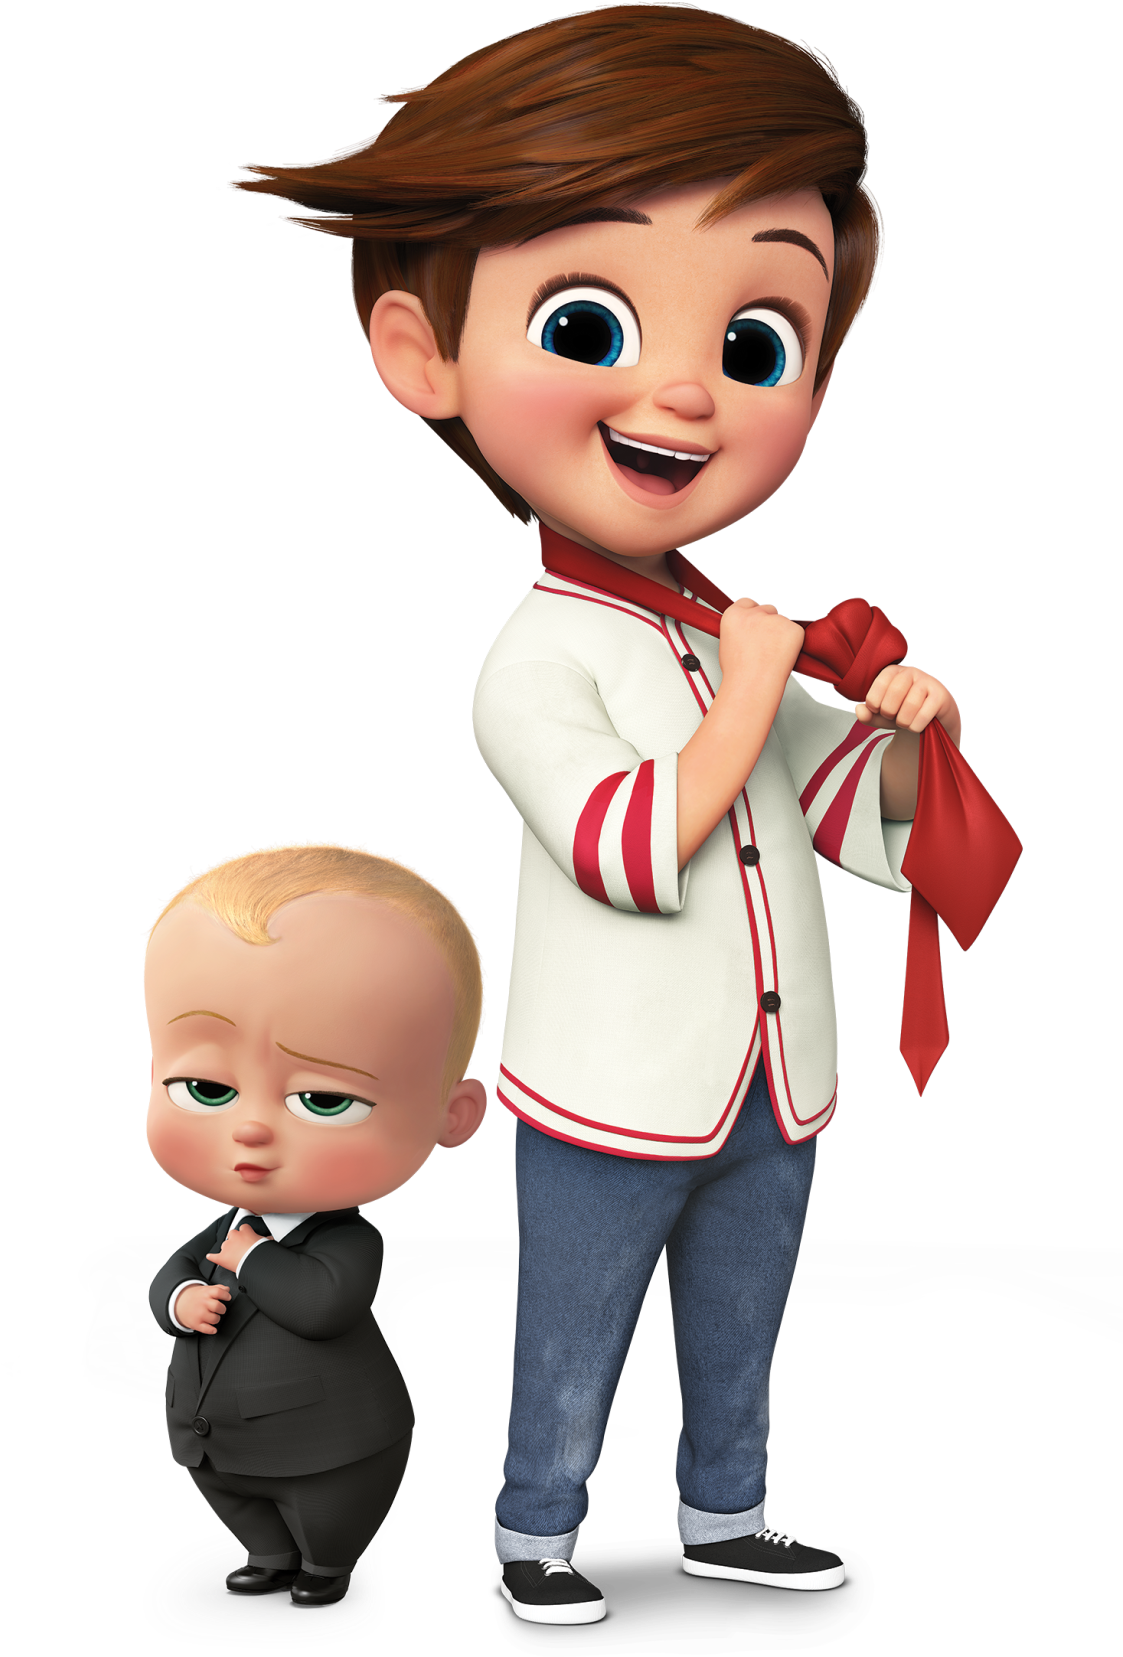 A Cartoon Of A Boy And A Baby